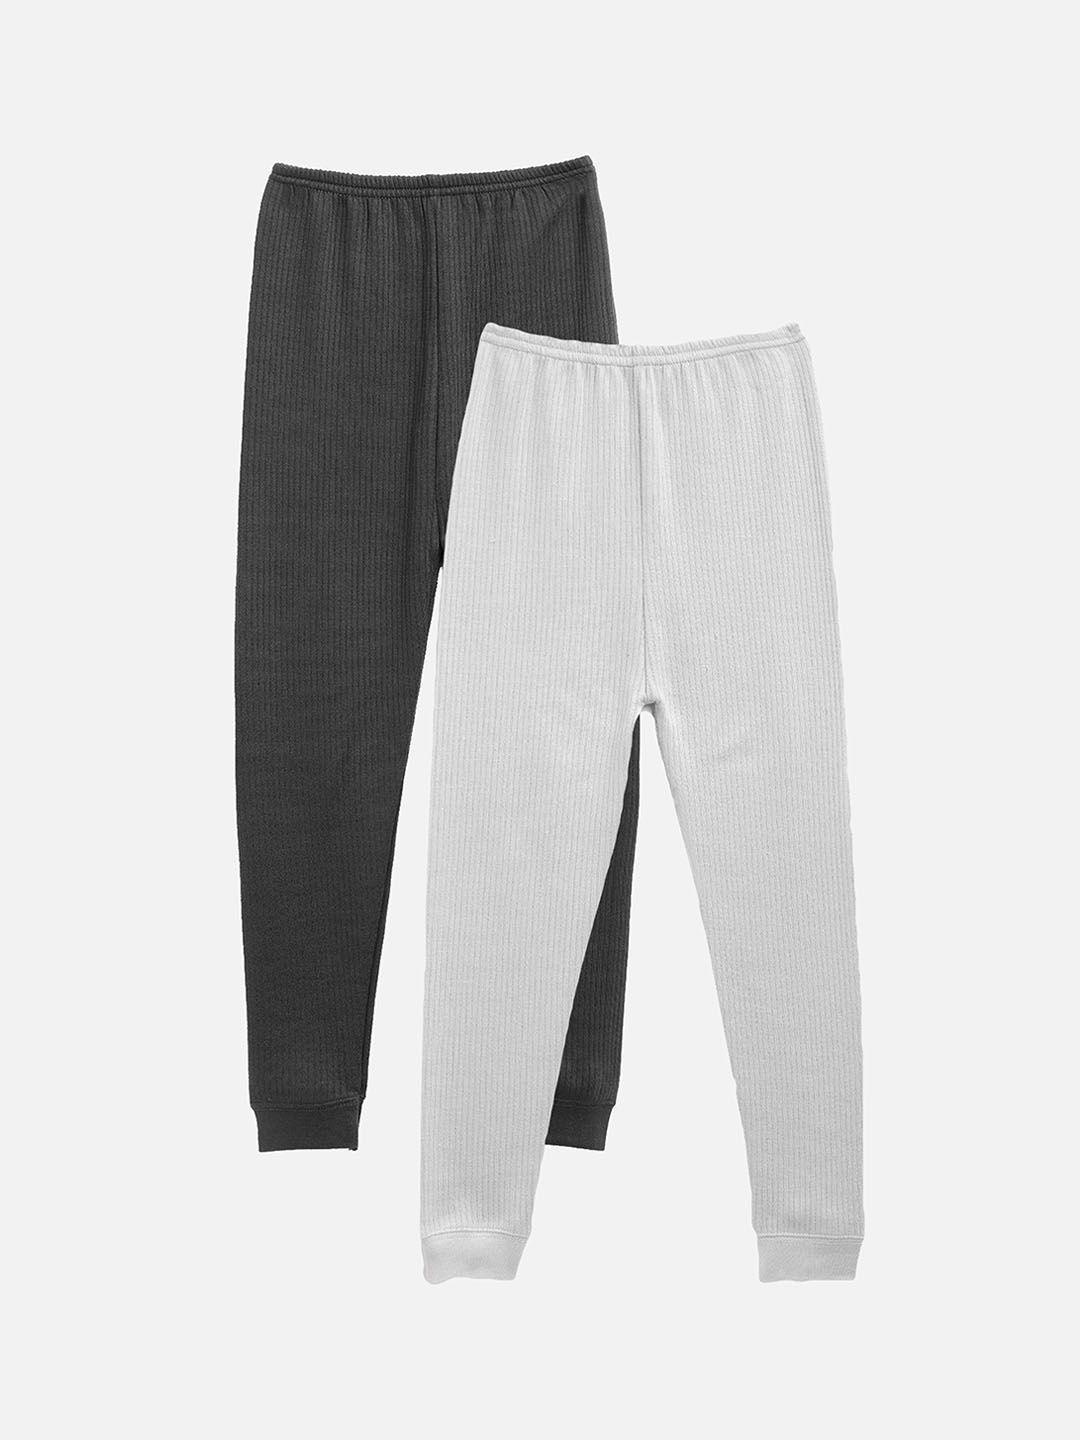 kanvin boys pack of 2 chacoal & grey solid thermal bottoms